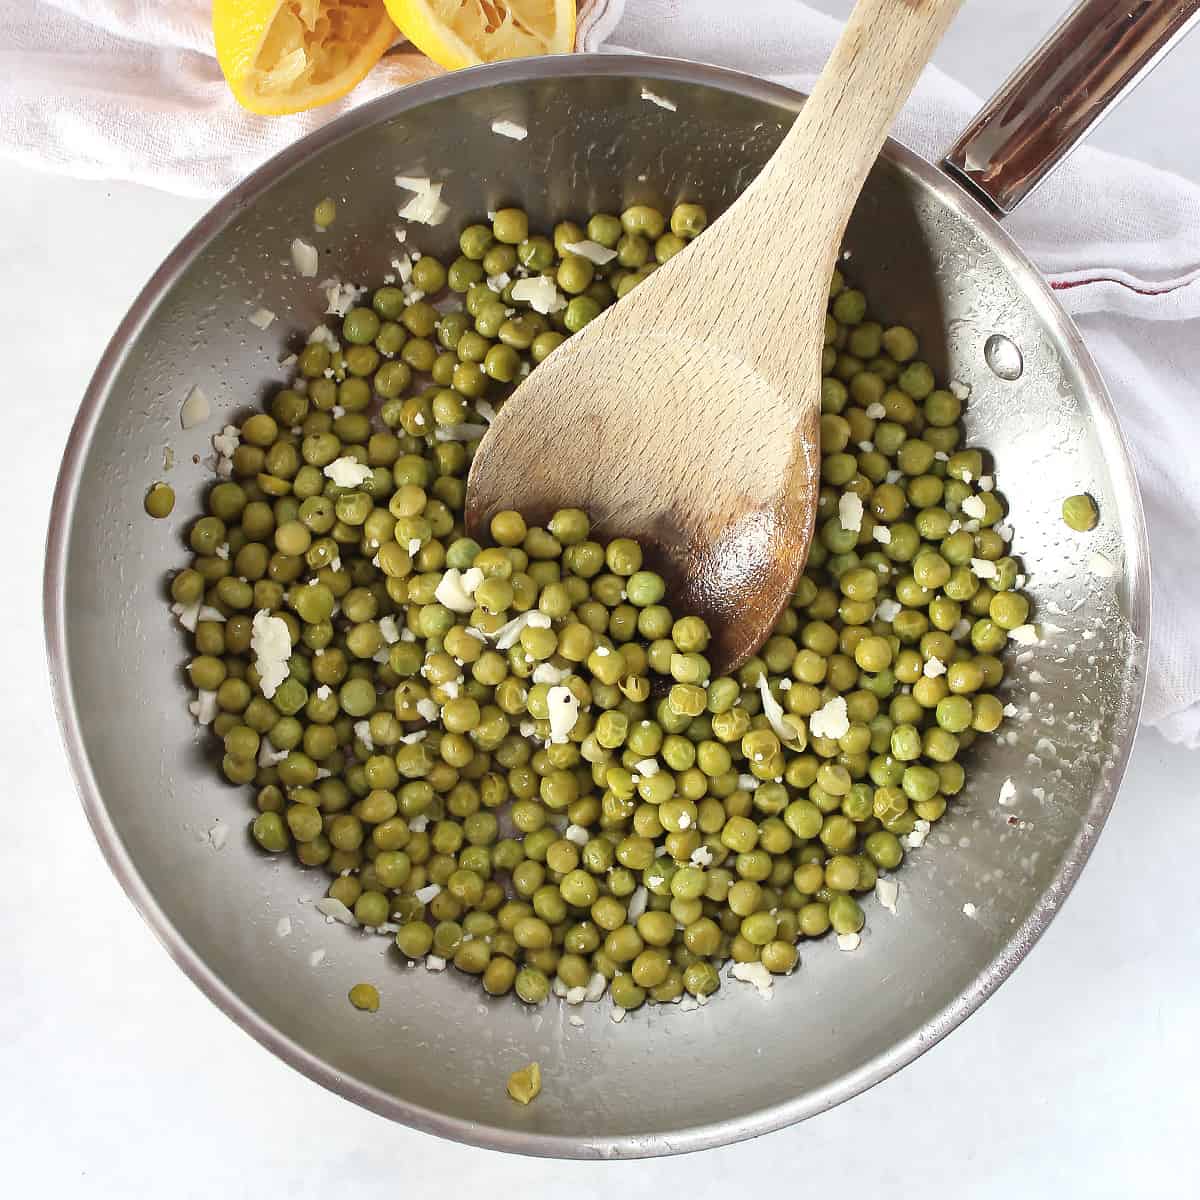 Sautéed green peas in a skillet next to two freshly squeezed lemon halves.